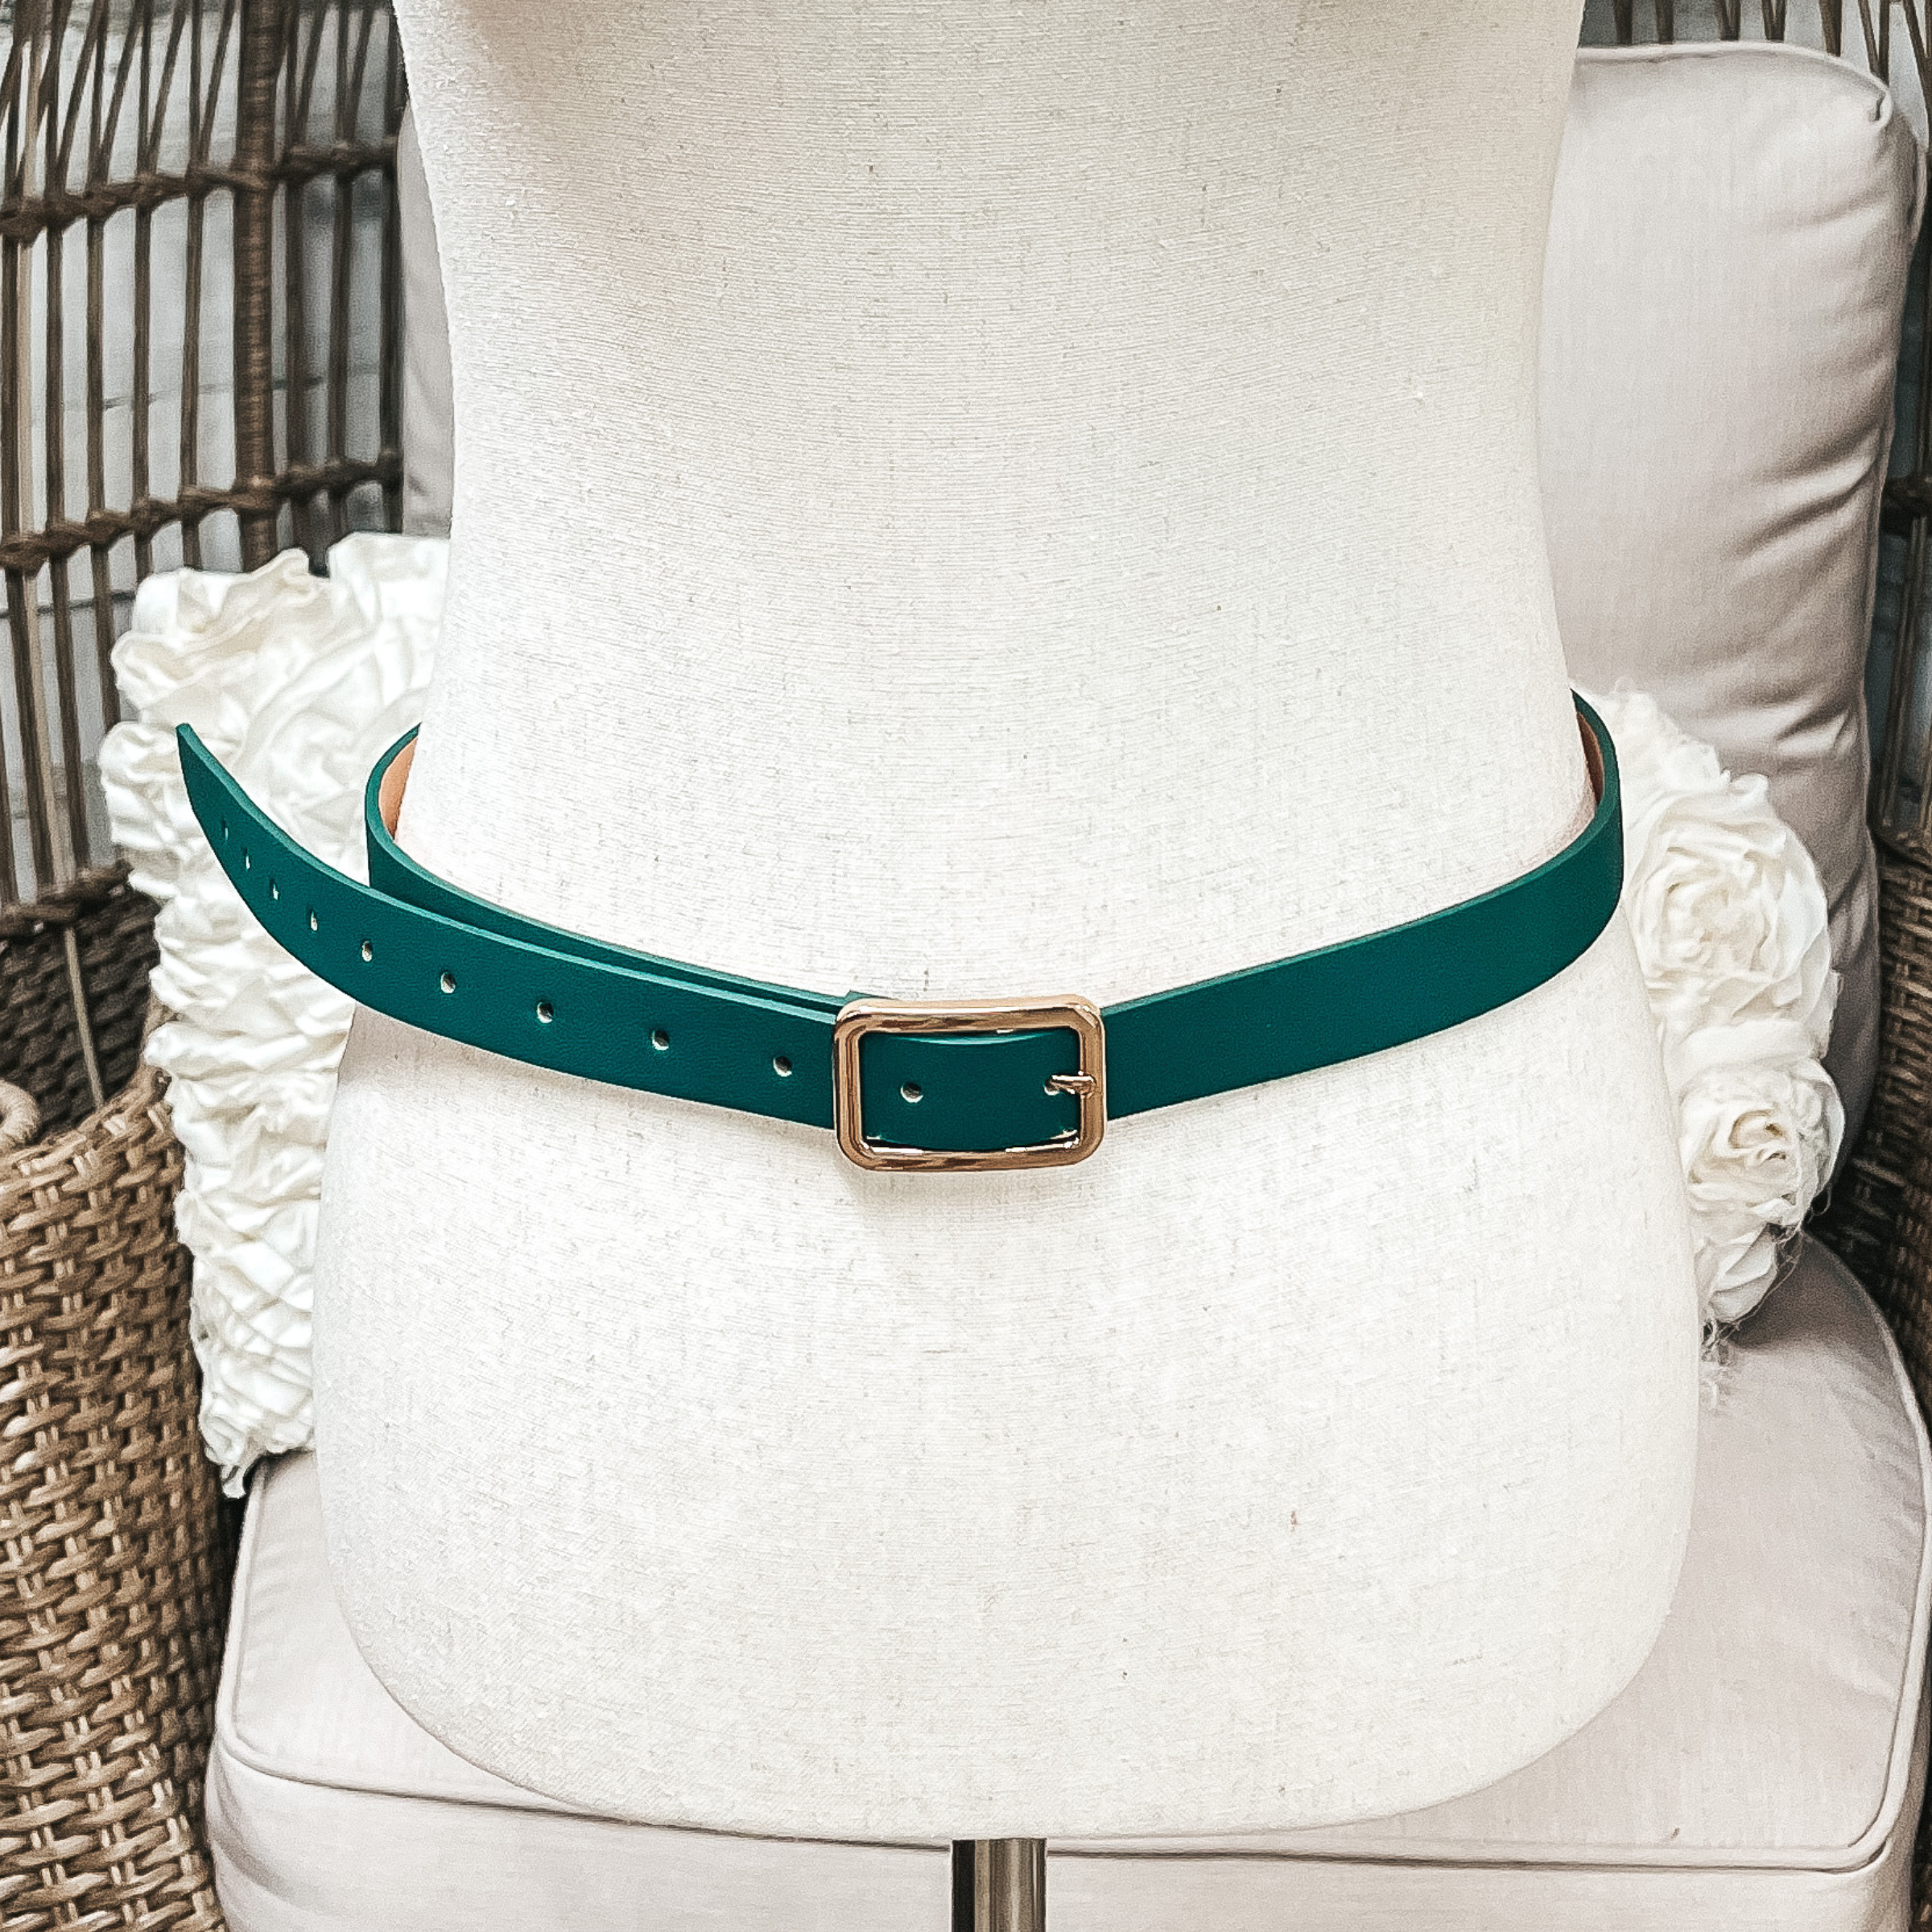 Set of Three | Skinny Fashion Belts in Burgundy, Cognac, and Forest Green - Giddy Up Glamour Boutique